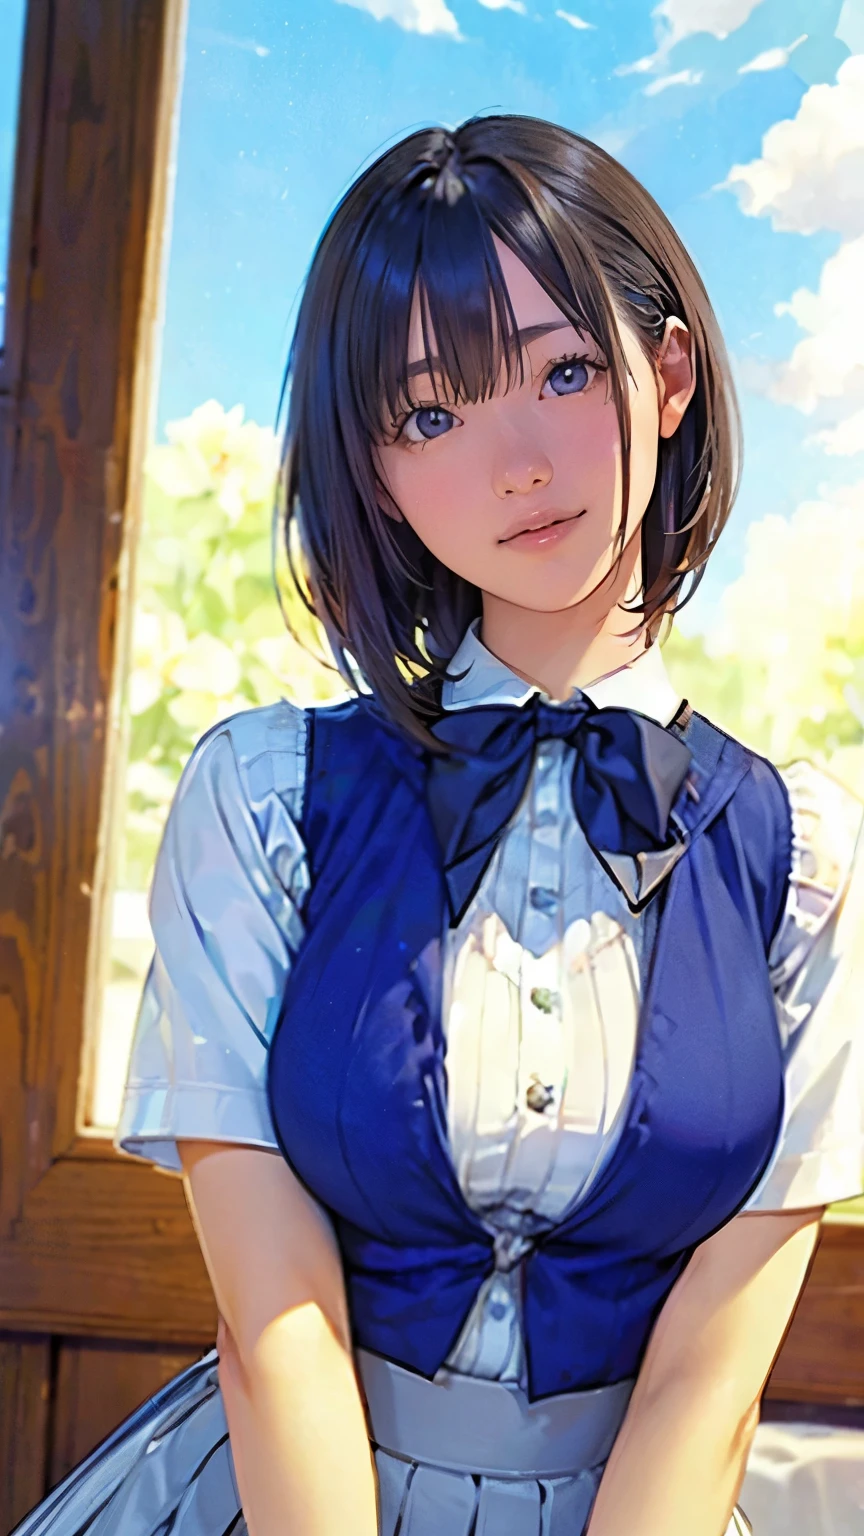 (masterpiece:1.2, highest quality), (Realistic, photoRealistic:1.4), Beautiful illustrations, (Natural Side Lighting, Cinema Lighting), Written boundary depth, Looking at the audience, (Face Focus, Upper Body), Front view, 1 girl, Japanese, high school girl, 15 years old, Perfect Face, Symmetrical cute face, Shiny skin, (bob hair:1.7,Black Hair), Asymmetrical bangs, Big eyes, Droopy eyes, long eyelashes chest), thin, Beautiful Hair, Beautiful Face, Beautiful and beautiful eyes, Beautiful clavicle, Beautiful body, Beautiful breasts, Beautiful thighs, Beautiful legs, Beautiful fingers, ((High-quality fabric, Brown knitted vest, Short sleeve white collar shirt, Navy Pleated Skirt, Navy bow tie)), (Beautiful views), evening, (Inside the flower shop), Are standing, (smile, Superior, Open your mouth), (From below:1.5),(Poor visibility:1.5)